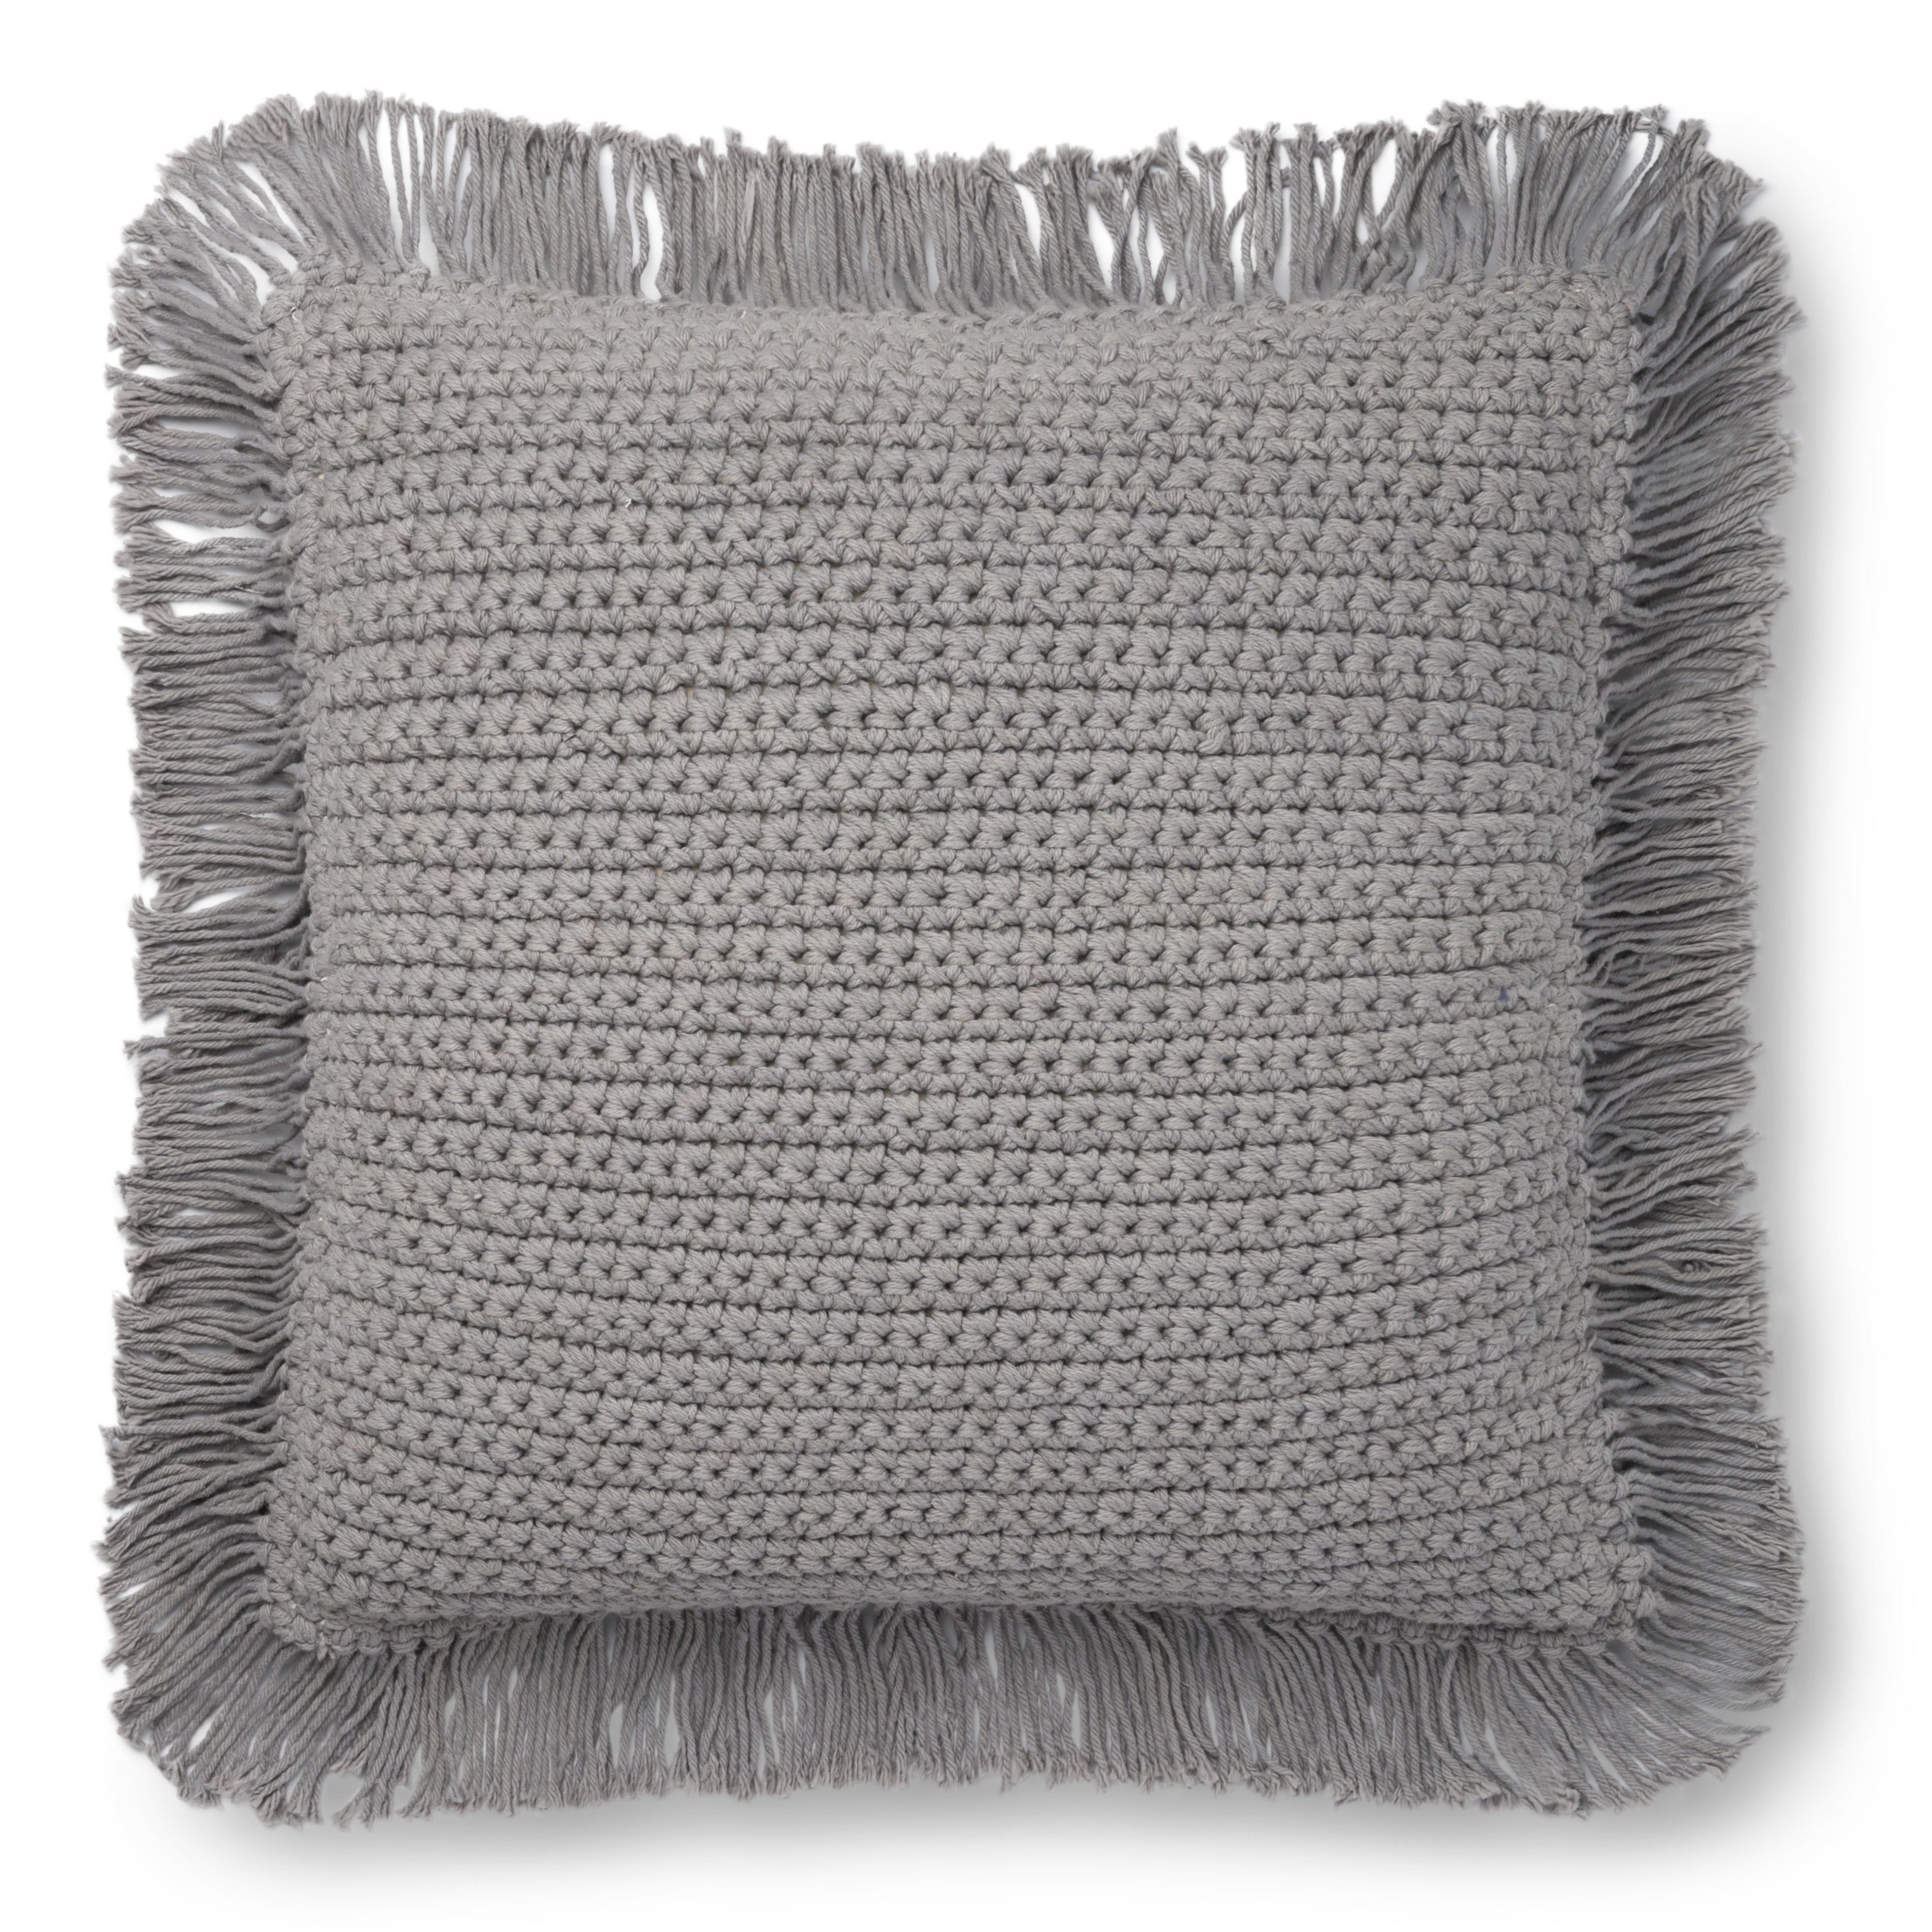 Justina Blakeney x Loloi Pillows P0806 Grey 22" x 22" Cover Only - Image 0